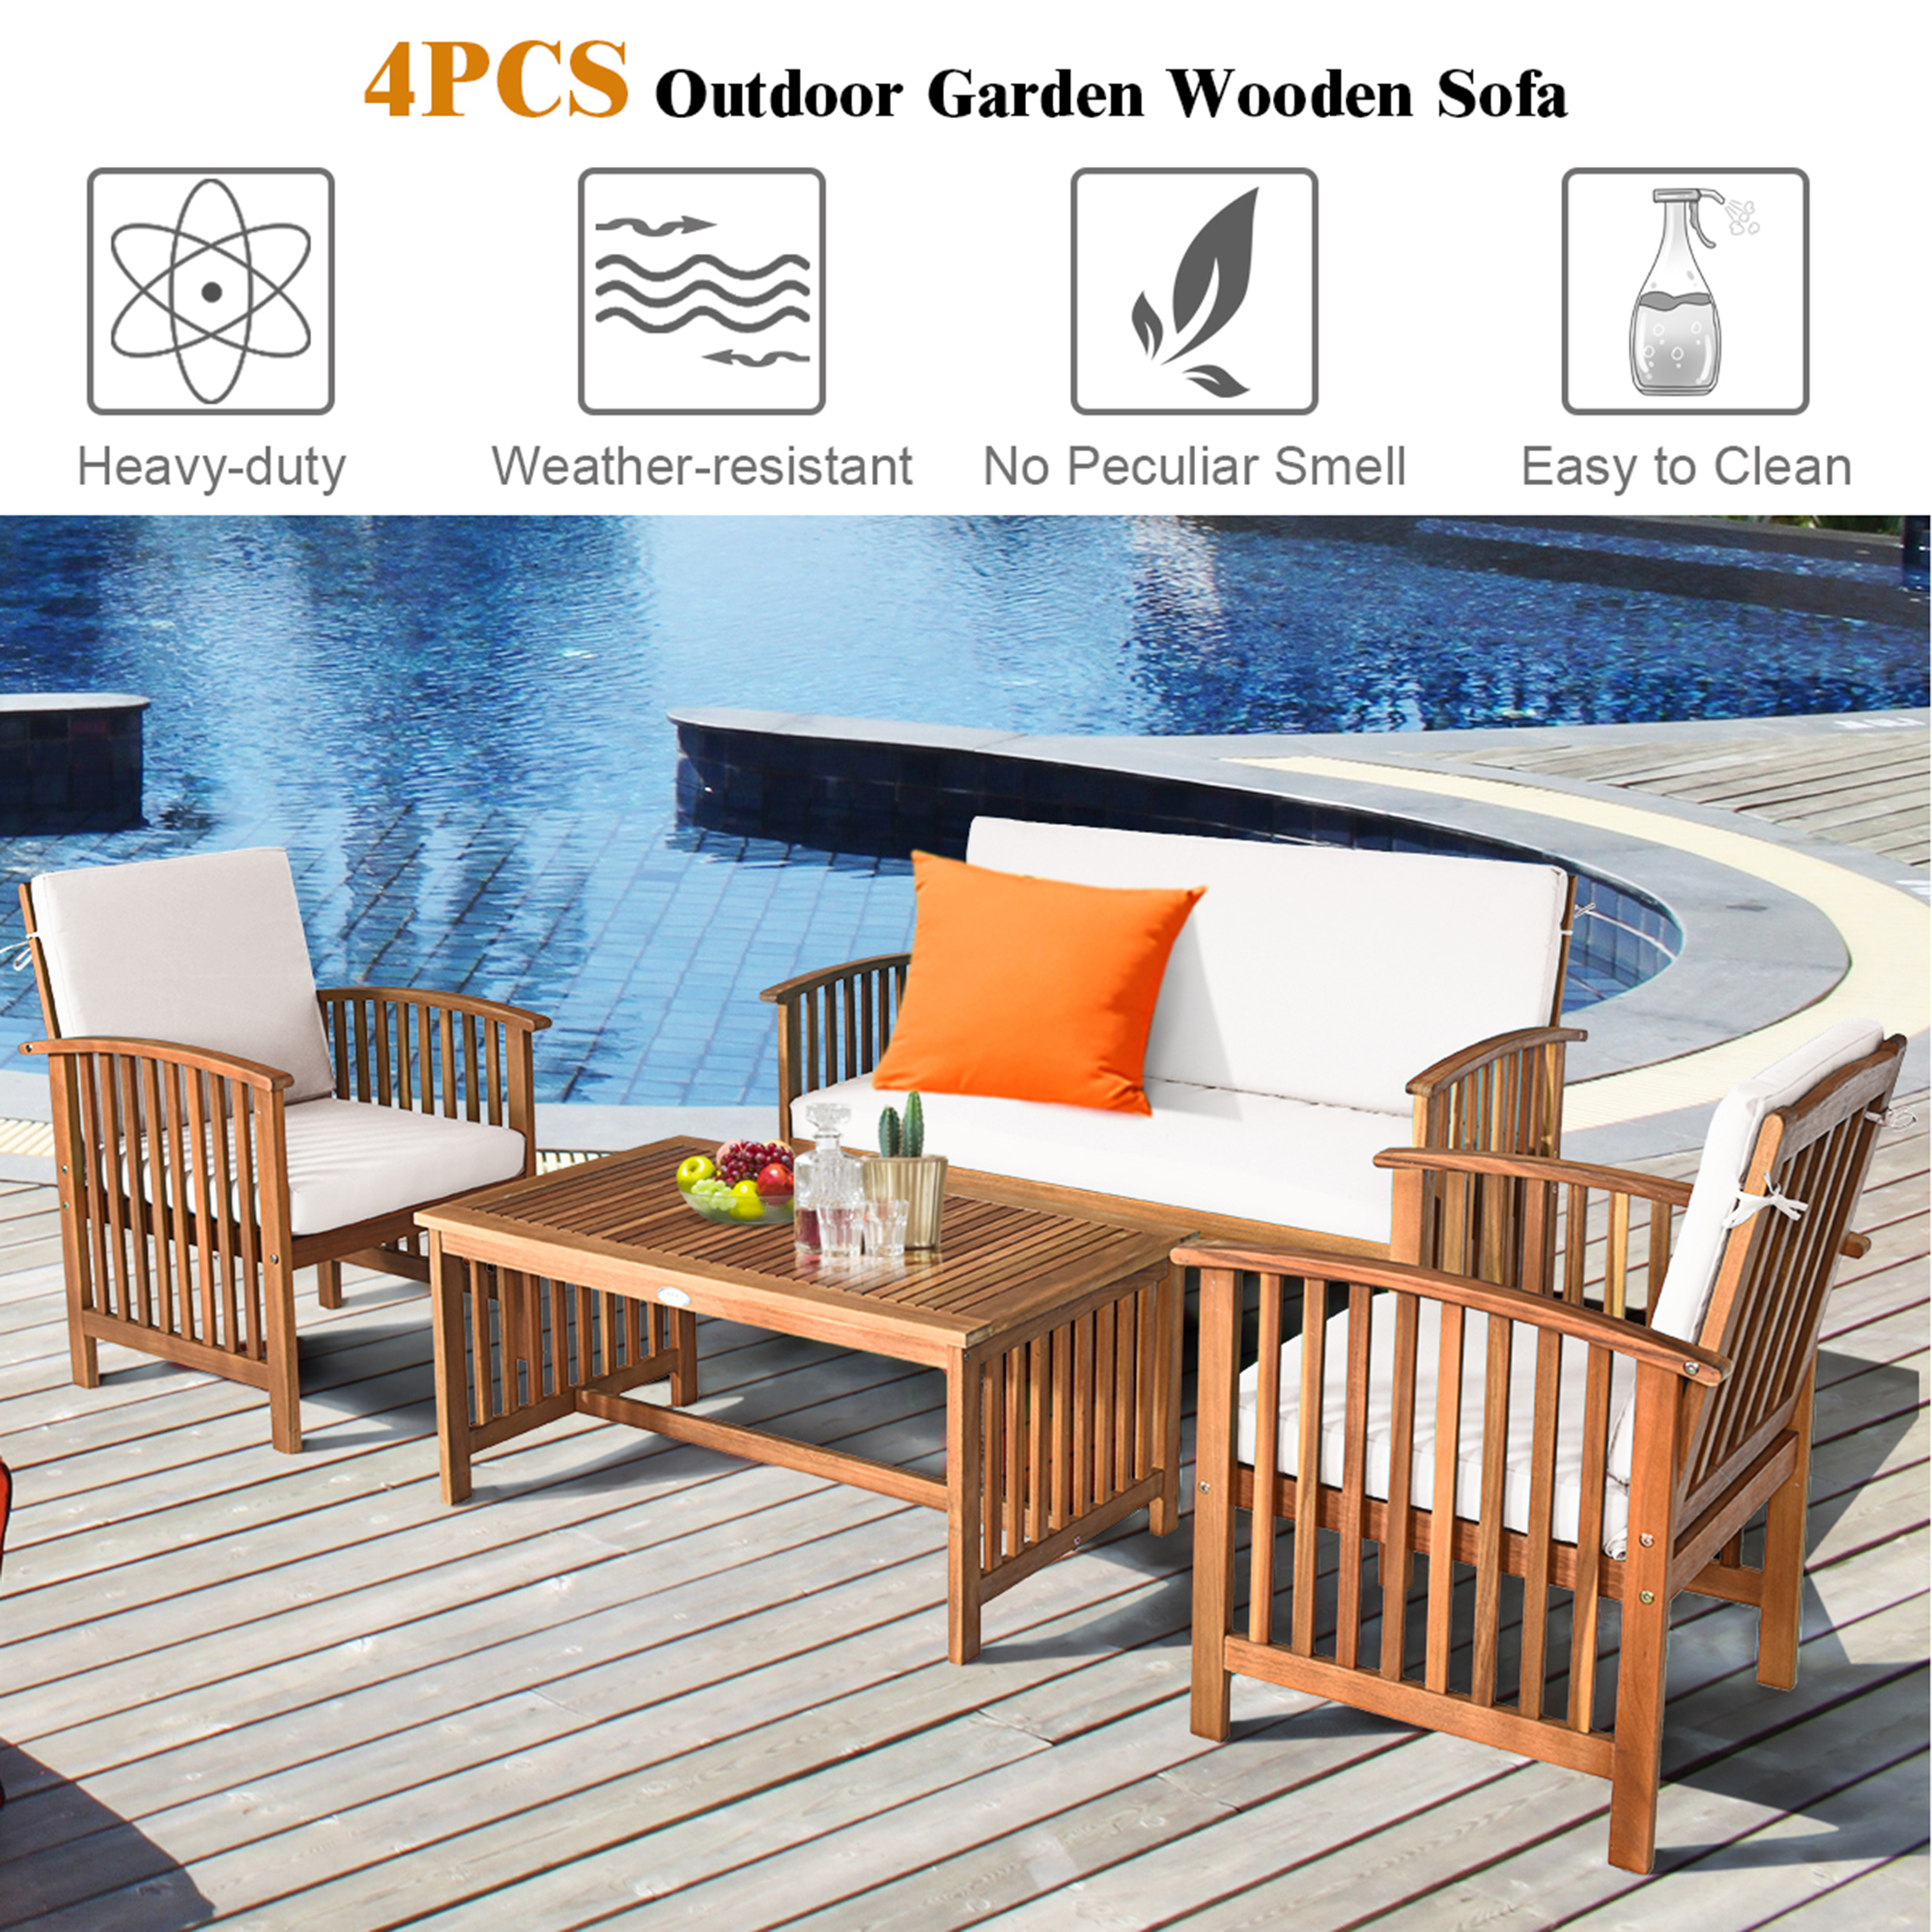 Costway 4PCS Patio Solid Wood Furniture Set Conversation Coffee Table W/White Cushion